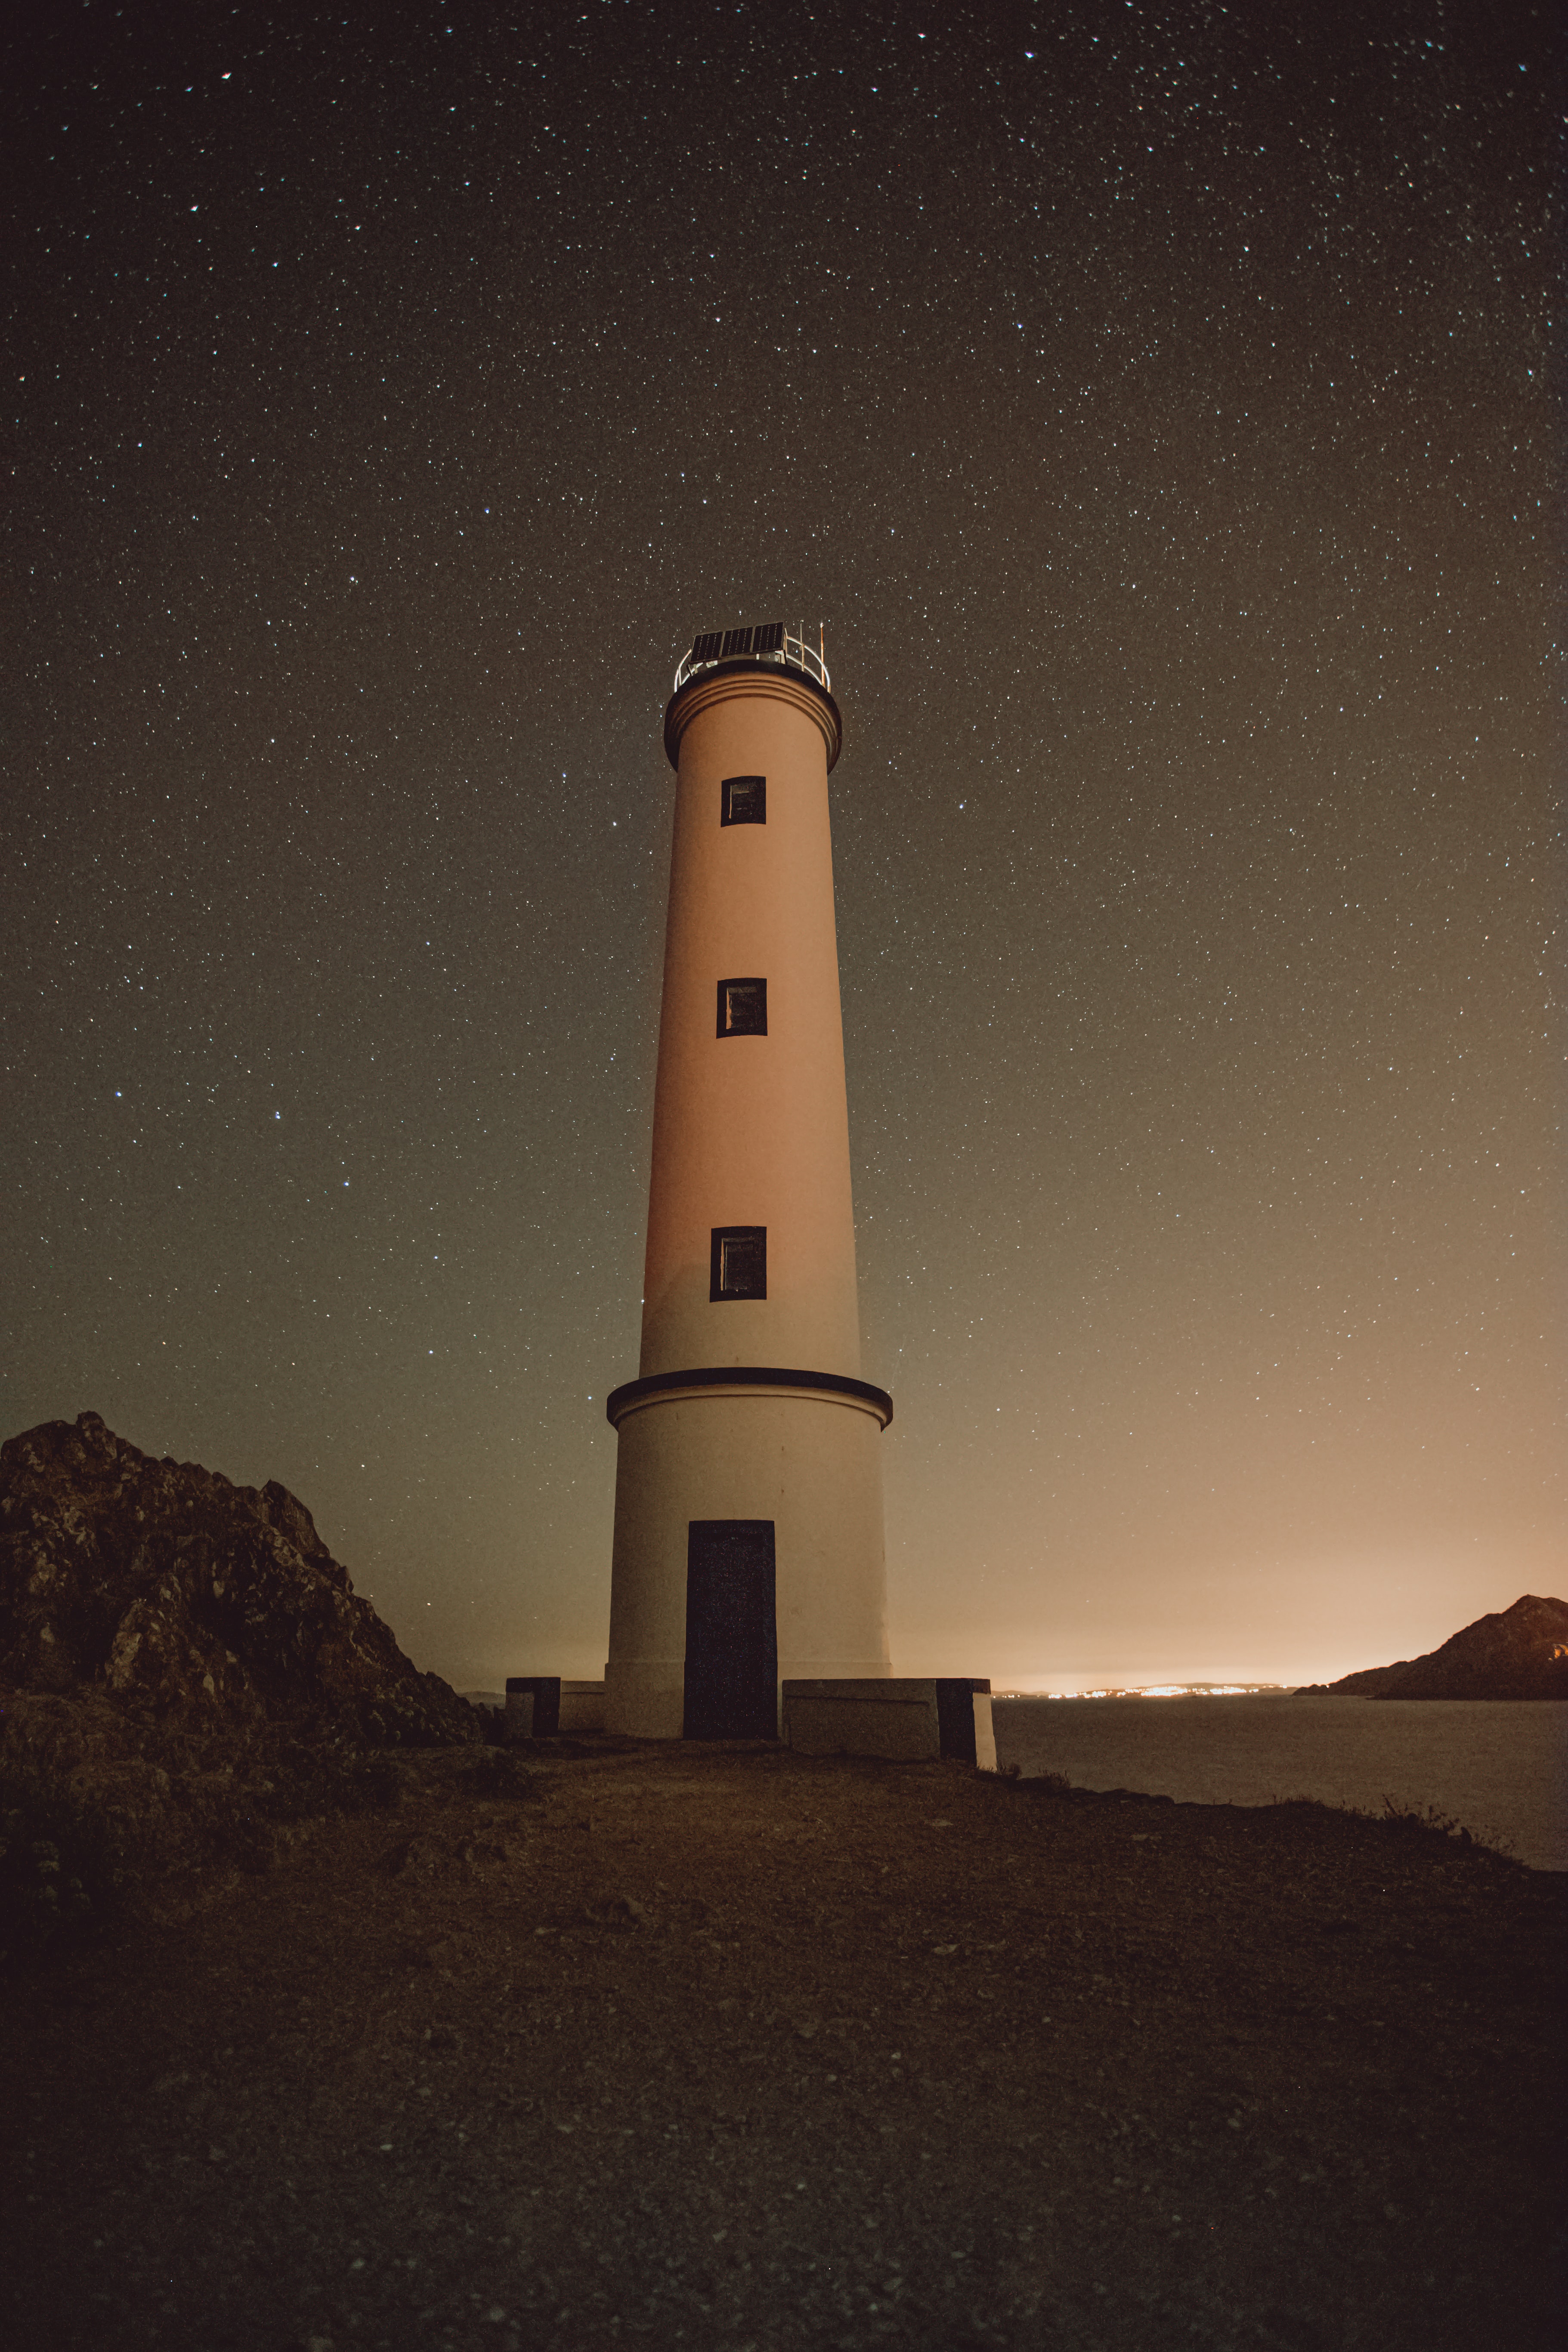 stars, nature, night, building, rocks, starry sky, lighthouse images